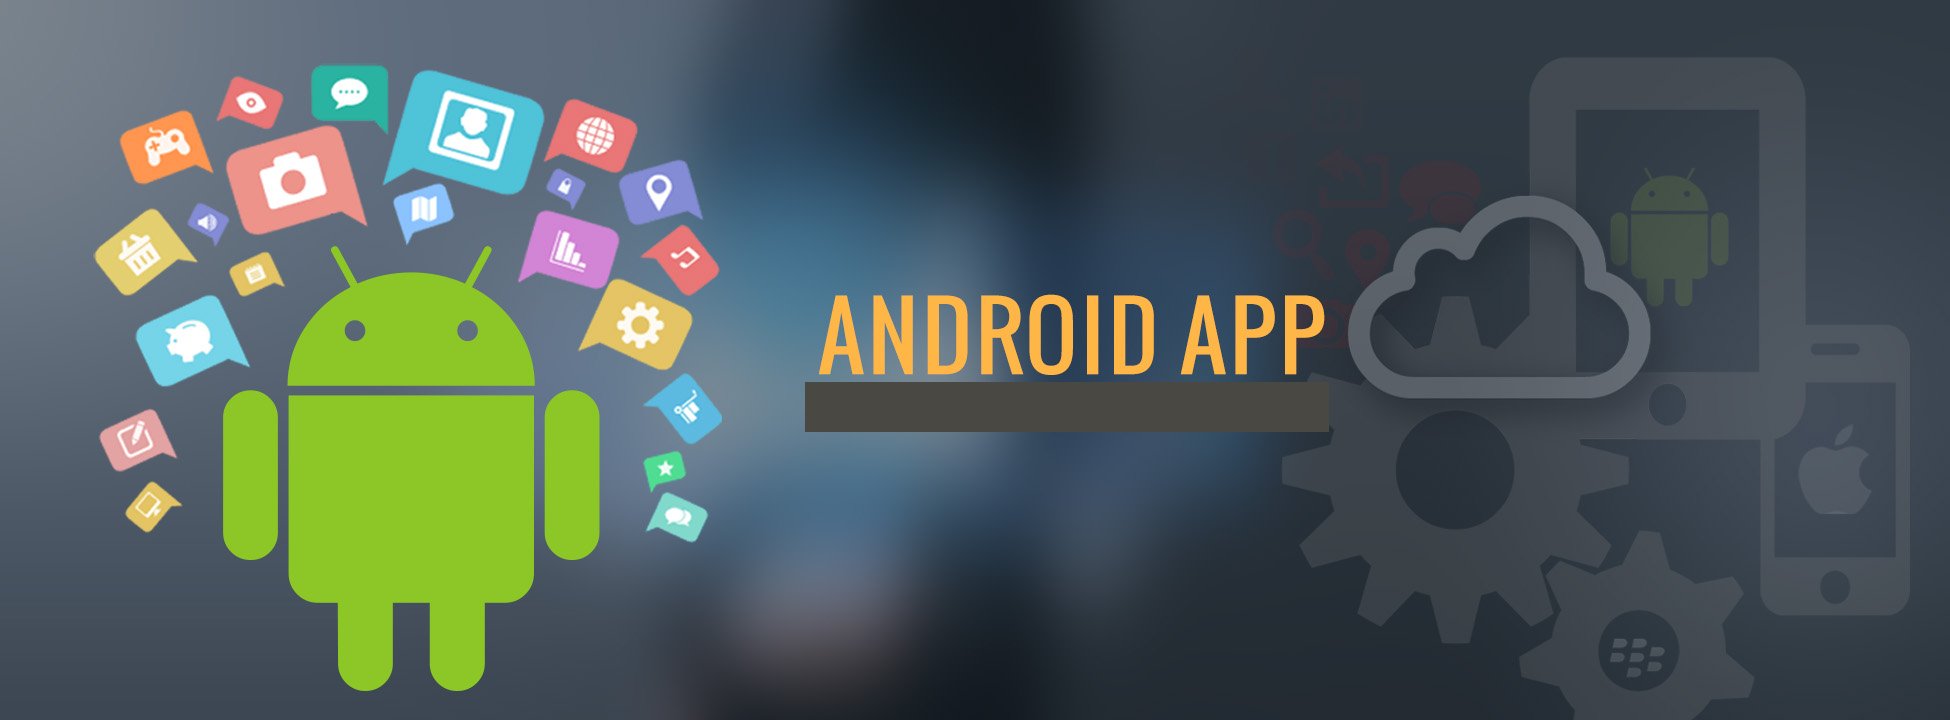 coaching class android app